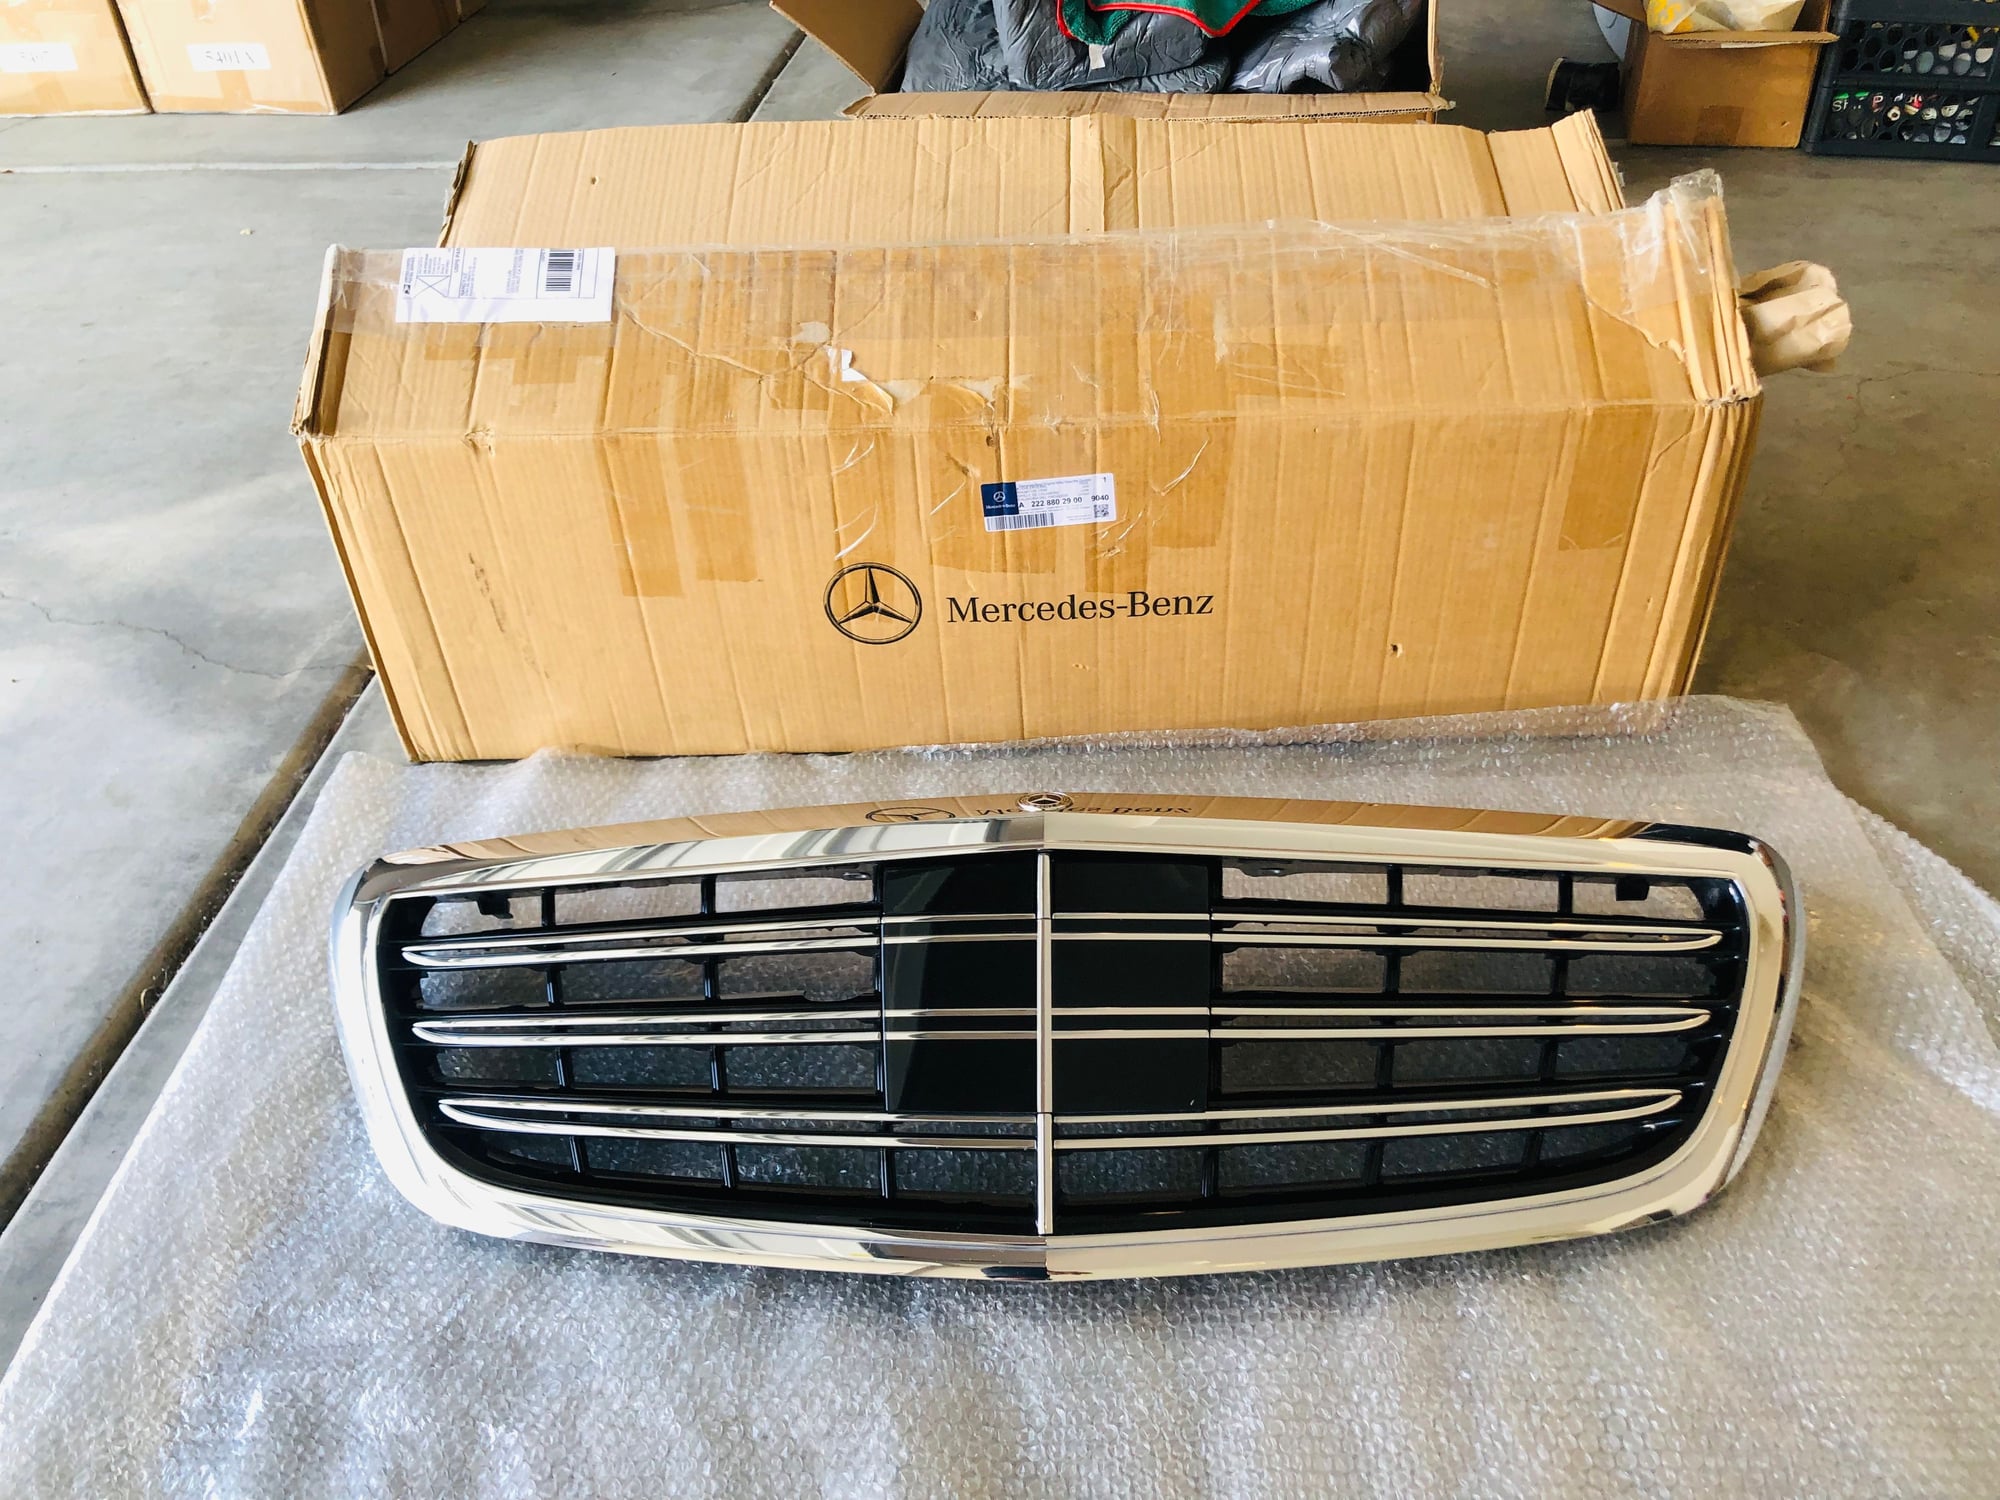 Exterior Body Parts - Mercedes OEM +2018 W222 Sedan S Class Front Grille - New - 2014 to 2020 Mercedes-Benz S63 AMG - Daimond Bar, CA 91765, United States